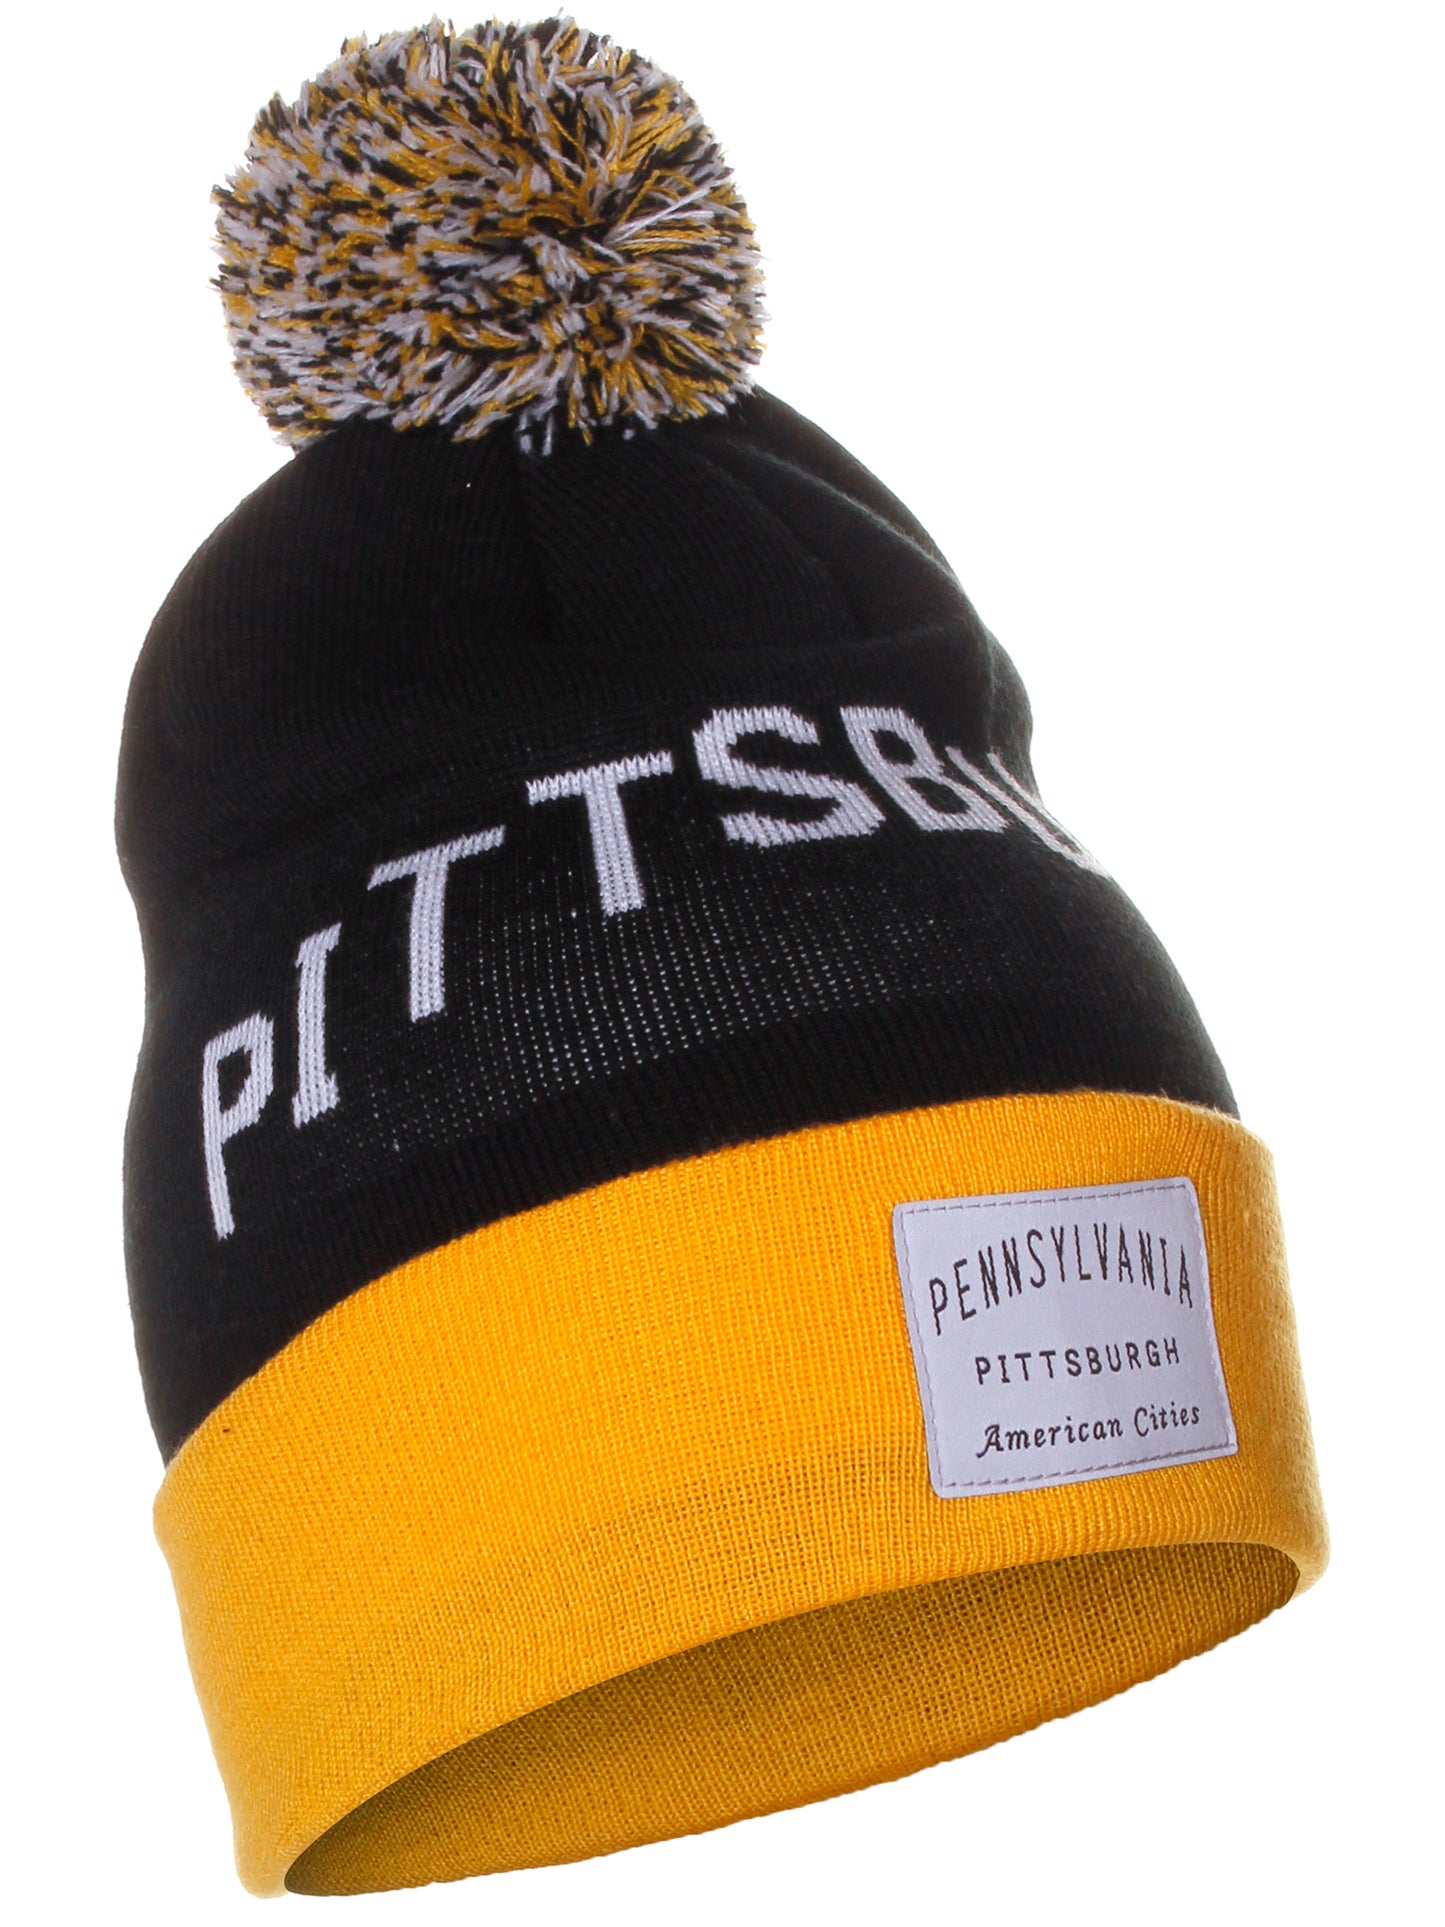 American Cities Pittsbugh Pennsylvania Arch Letters Pom Pom Knit Hat Cap Beanie